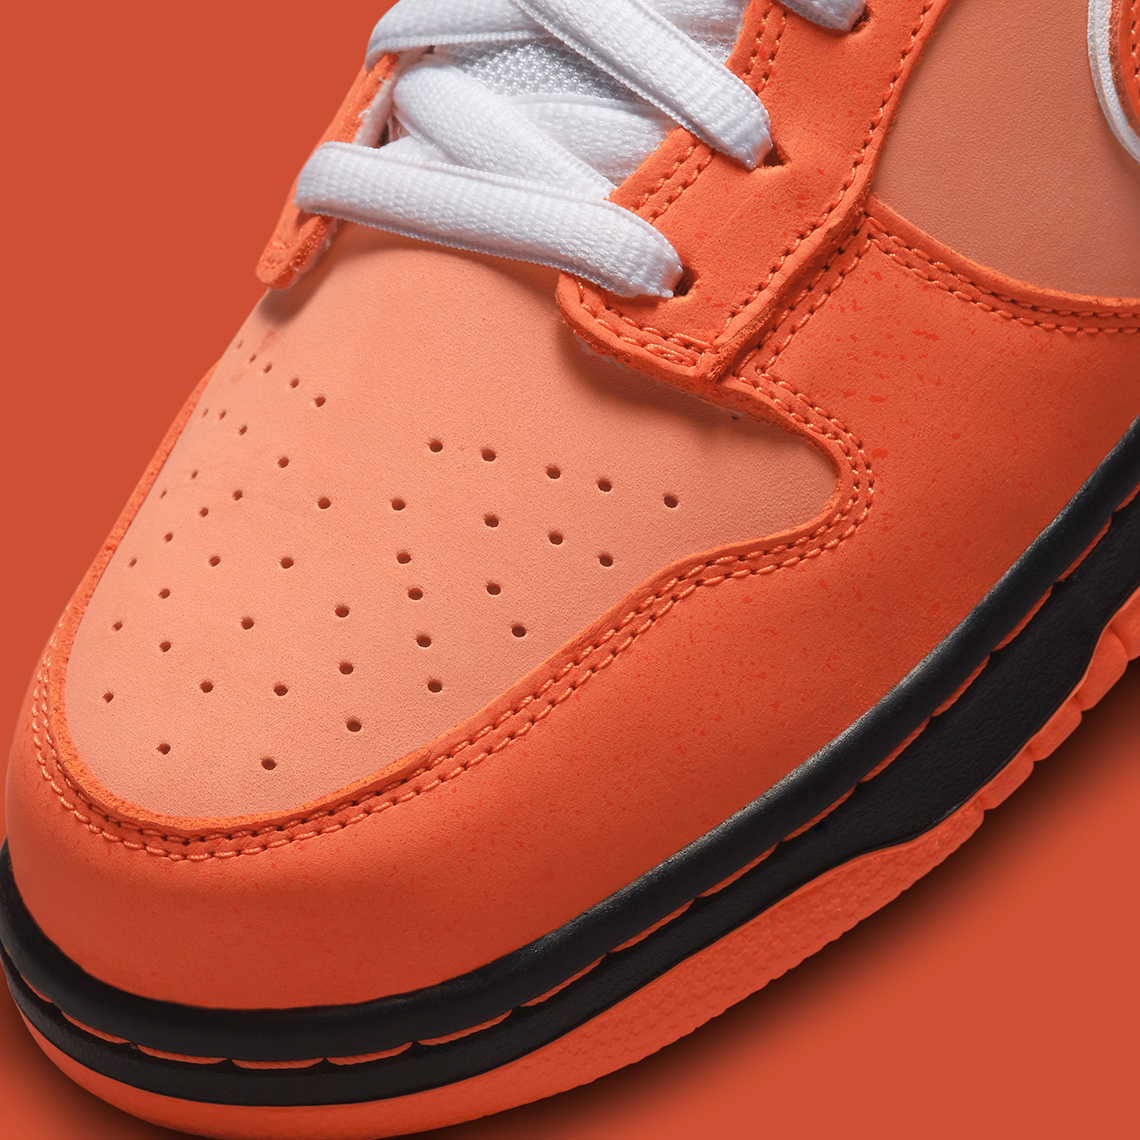 Concepts and Nike SB Dunk Low Orange Lobster 6